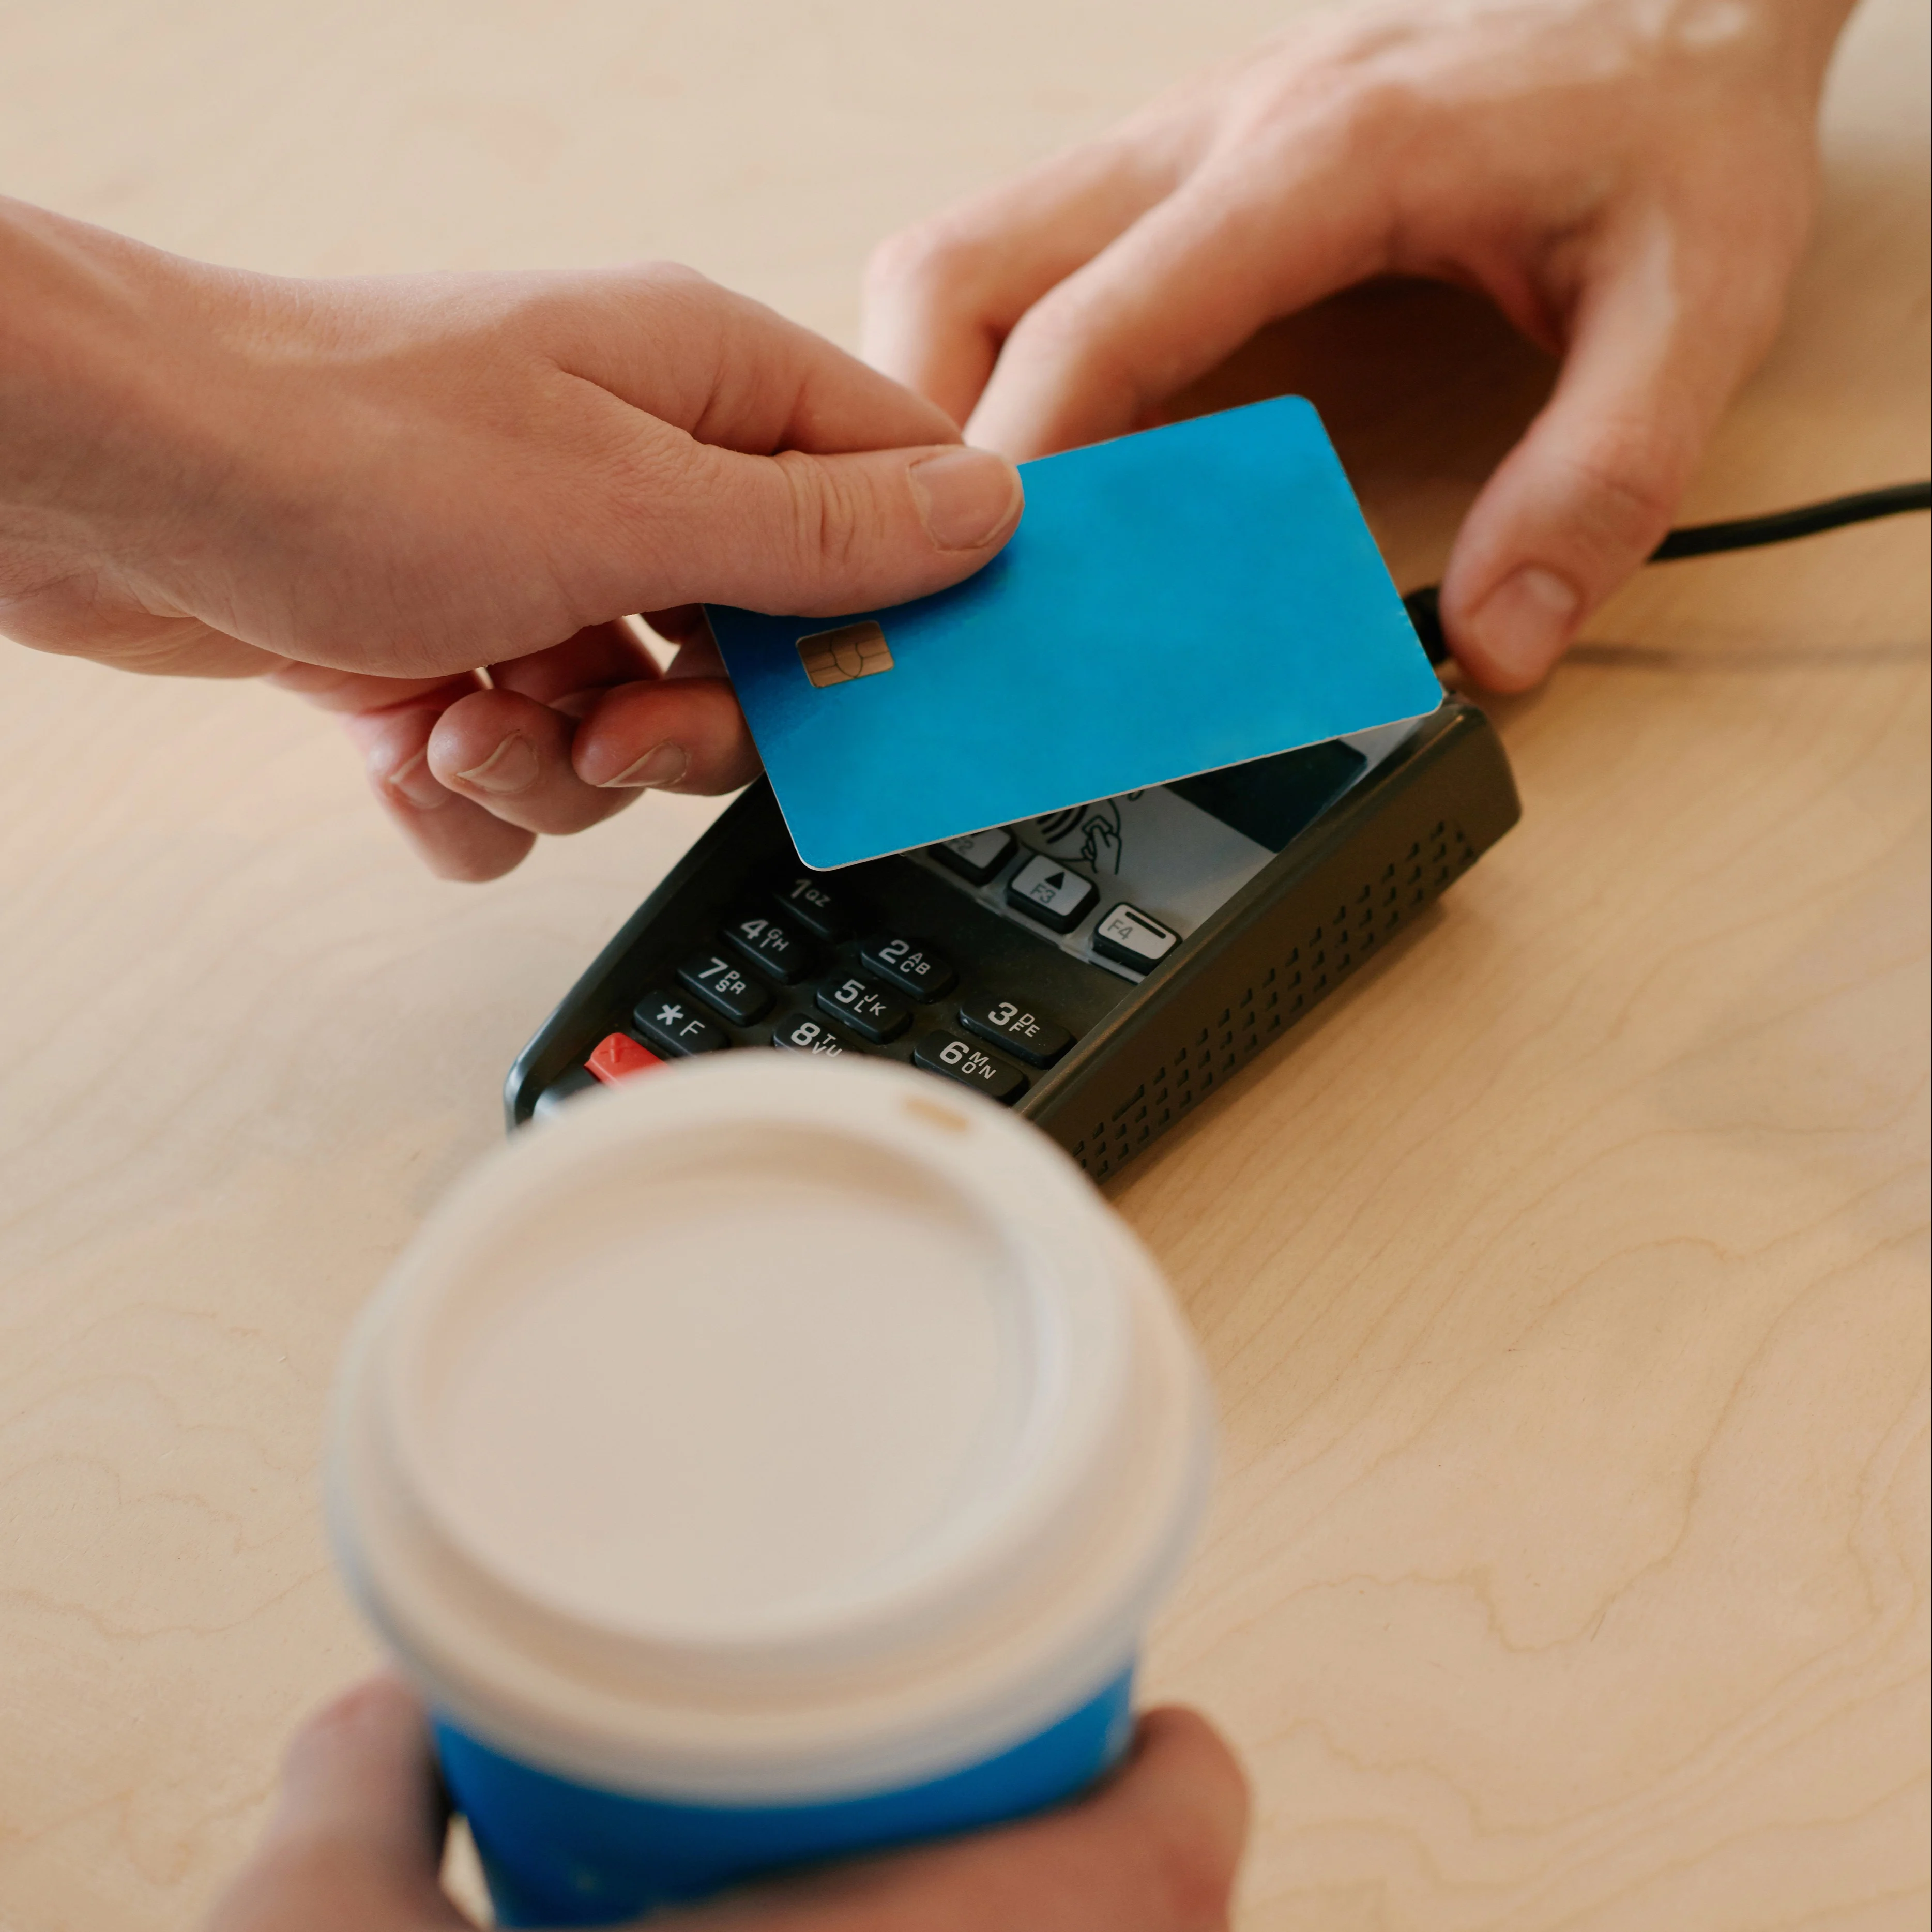 Two people interacting with a transaction tool and a credit card